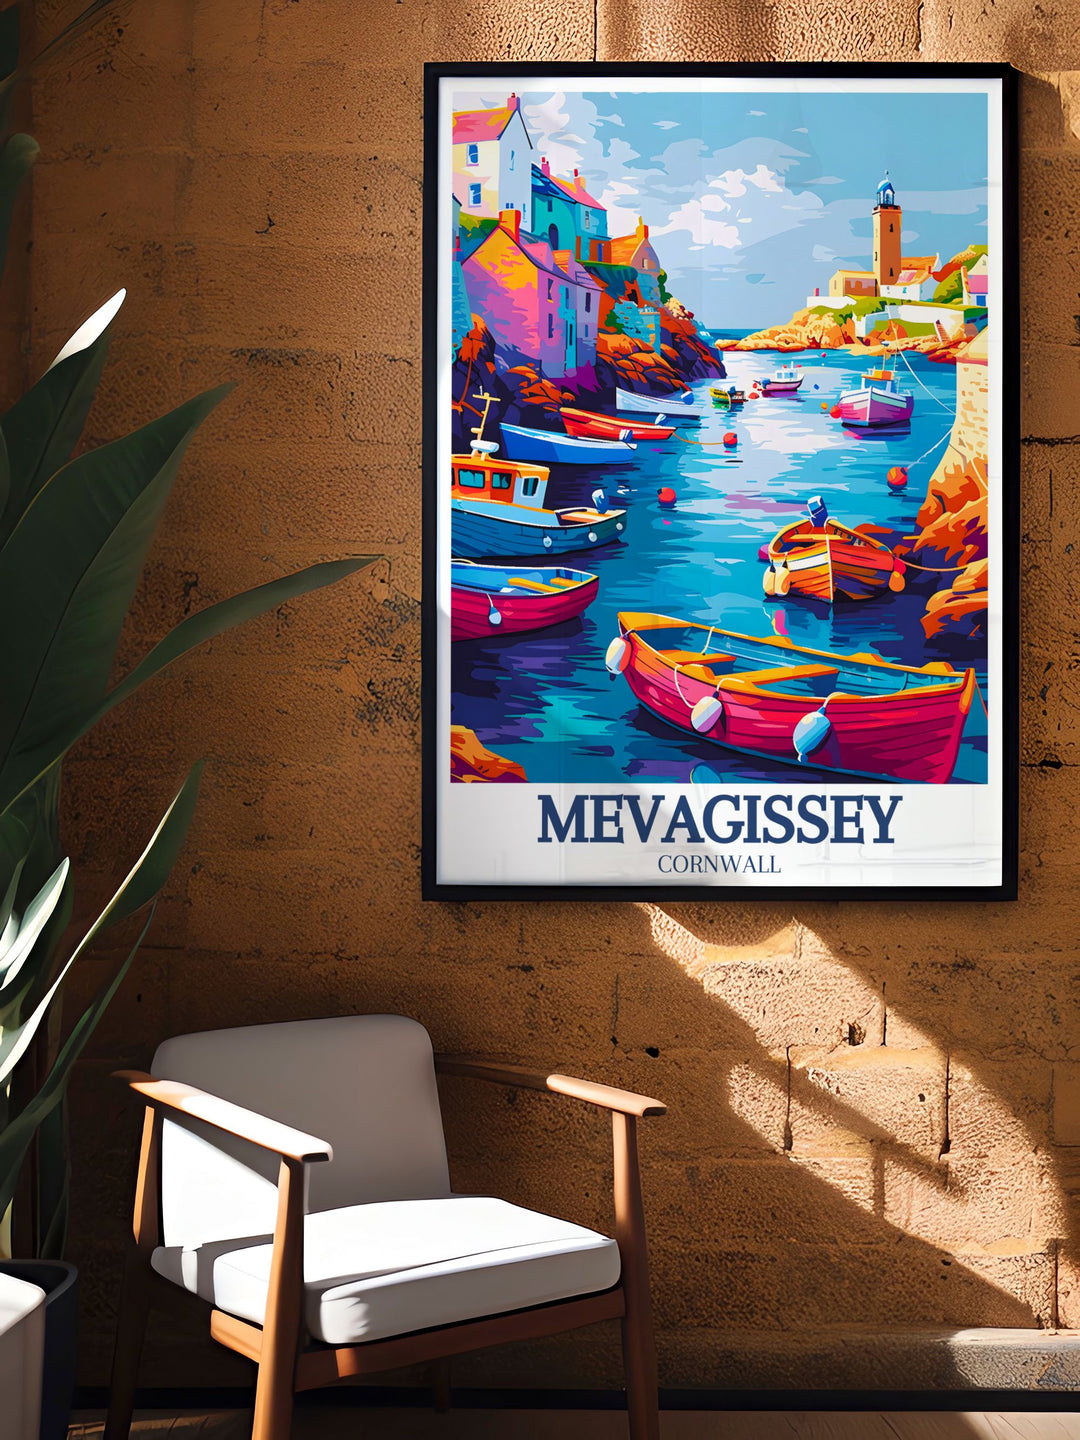 This art print celebrates the quaint charm of Mevagissey, showcasing its narrow streets, colorful cottages, and vibrant harbor. Ideal for those who appreciate picturesque coastal towns, this poster brings the enchanting beauty of Mevagissey into your home.